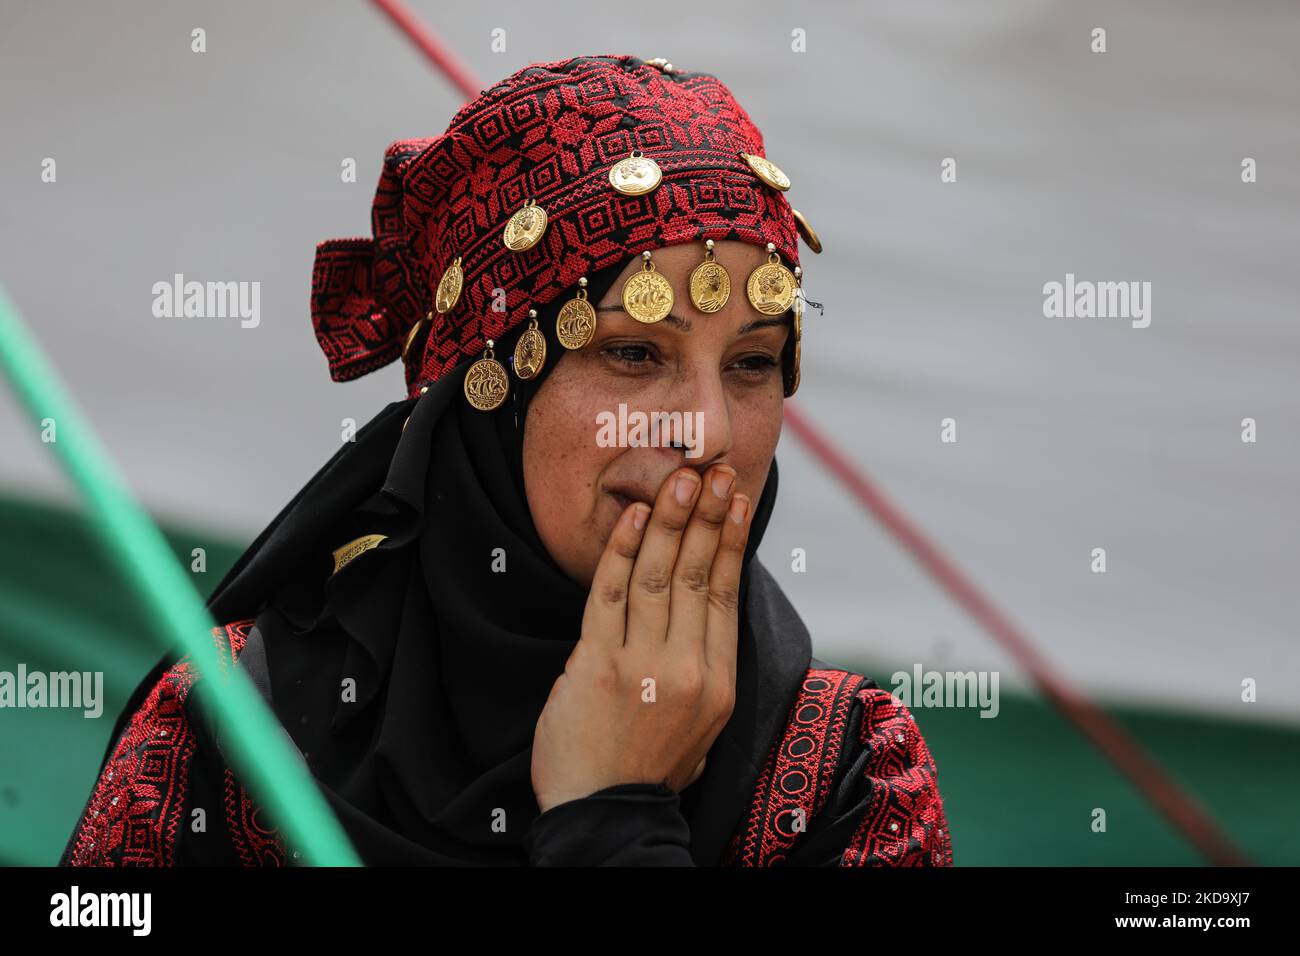 A Palestinian woman during a demonstration ahead of the 74th anniversary of the Nakba, the 'catastrophe' of Israel's creation in 1948.in Gaza City, on May 14, 2022. - Palestinians and Arab Israelis commemorate the Nakba on May 15 -- the official date of Israel's creation according to the western calendar. Hundreds of thousands of Palestinians fled their homes or were forced out of them on the creation of Israel in 1948. Those who stayed in their villages when Israel was created are now described as Israeli Arabs, but the majority became refugees in the West Bank, Gaza Strip and neighbouring Ar Stock Photo